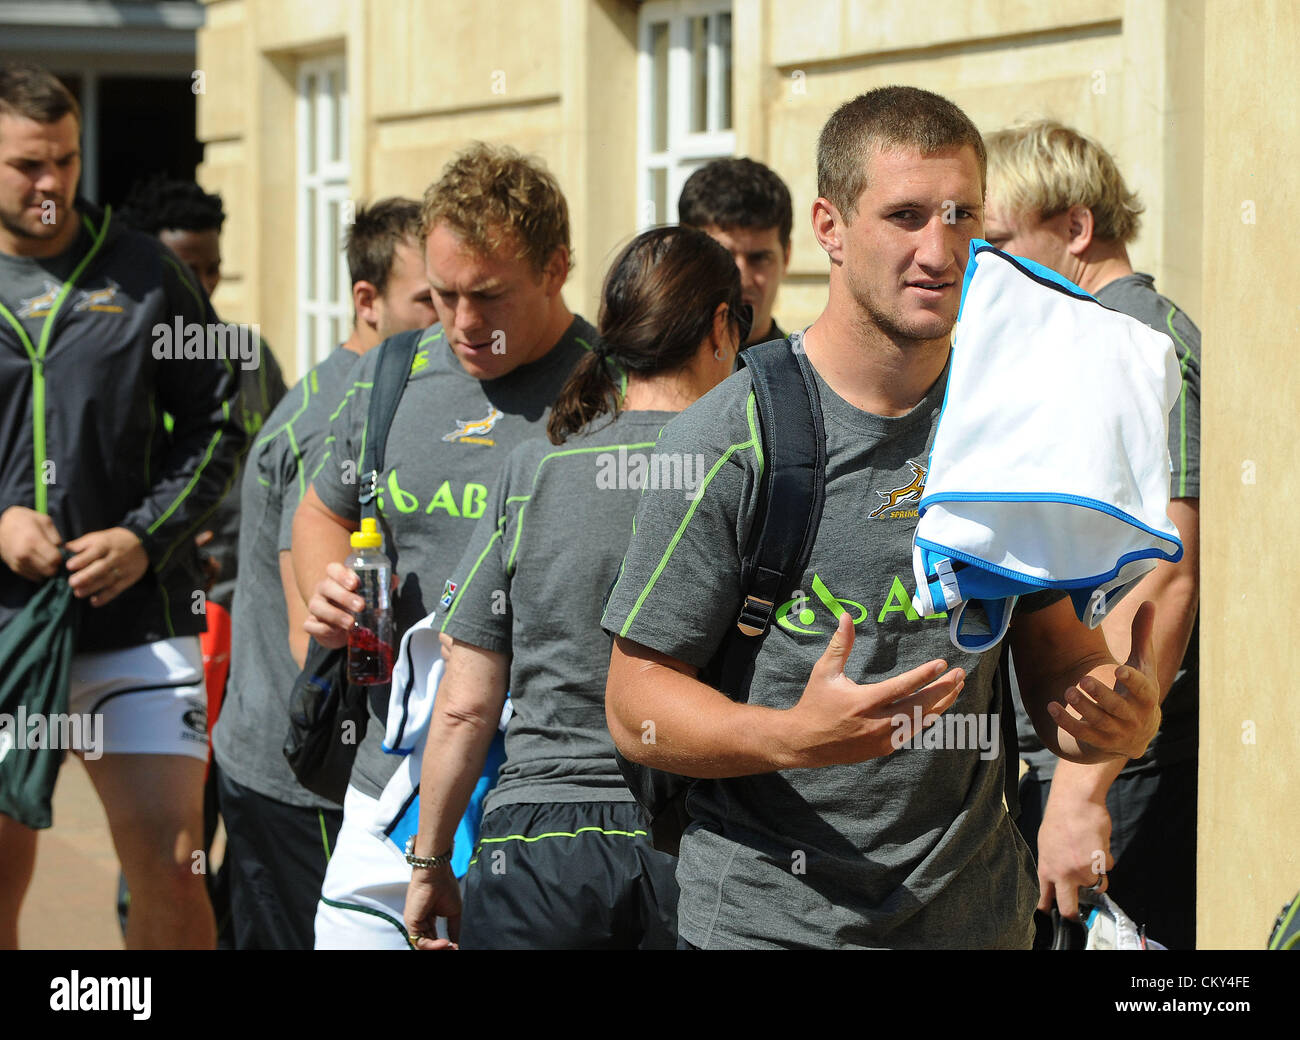 JOHANNESBURG, SOUTH AFRICA - SEPTEMBER 01, Johan Goosen arrives with other players during the South African national rugby team field session and media conference at KES on September 01, 2012 in Johannesburg, South Africa Photo by Duif du Toit / Gallo Images Stock Photo